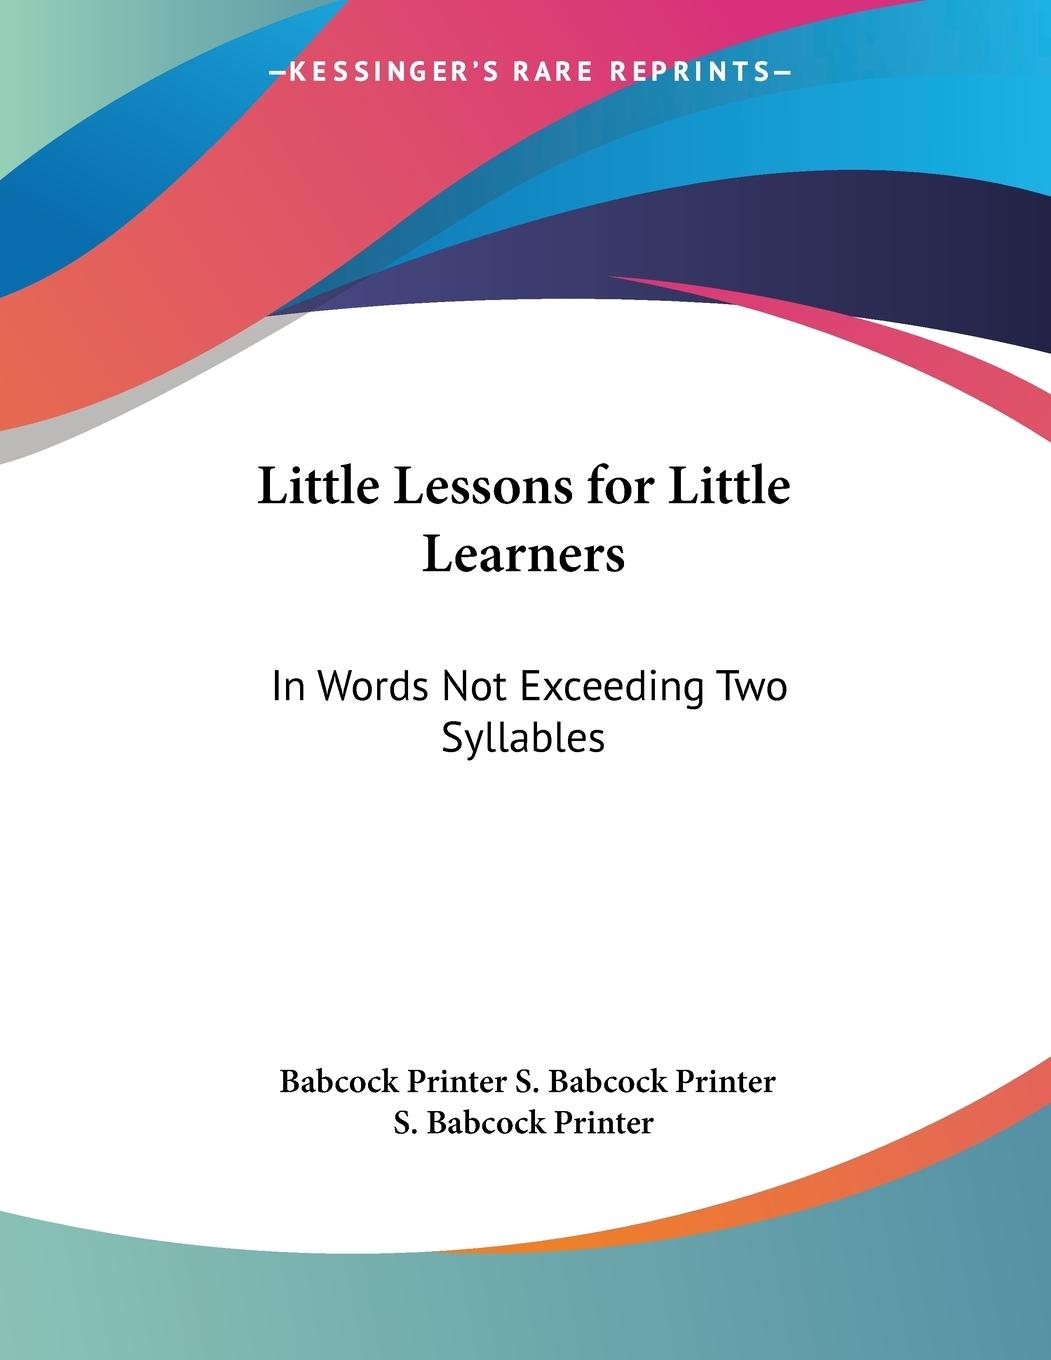 Little Lessons for Little Learners - S. Babcock Printer, Babcock Printer S. Babcock Printer